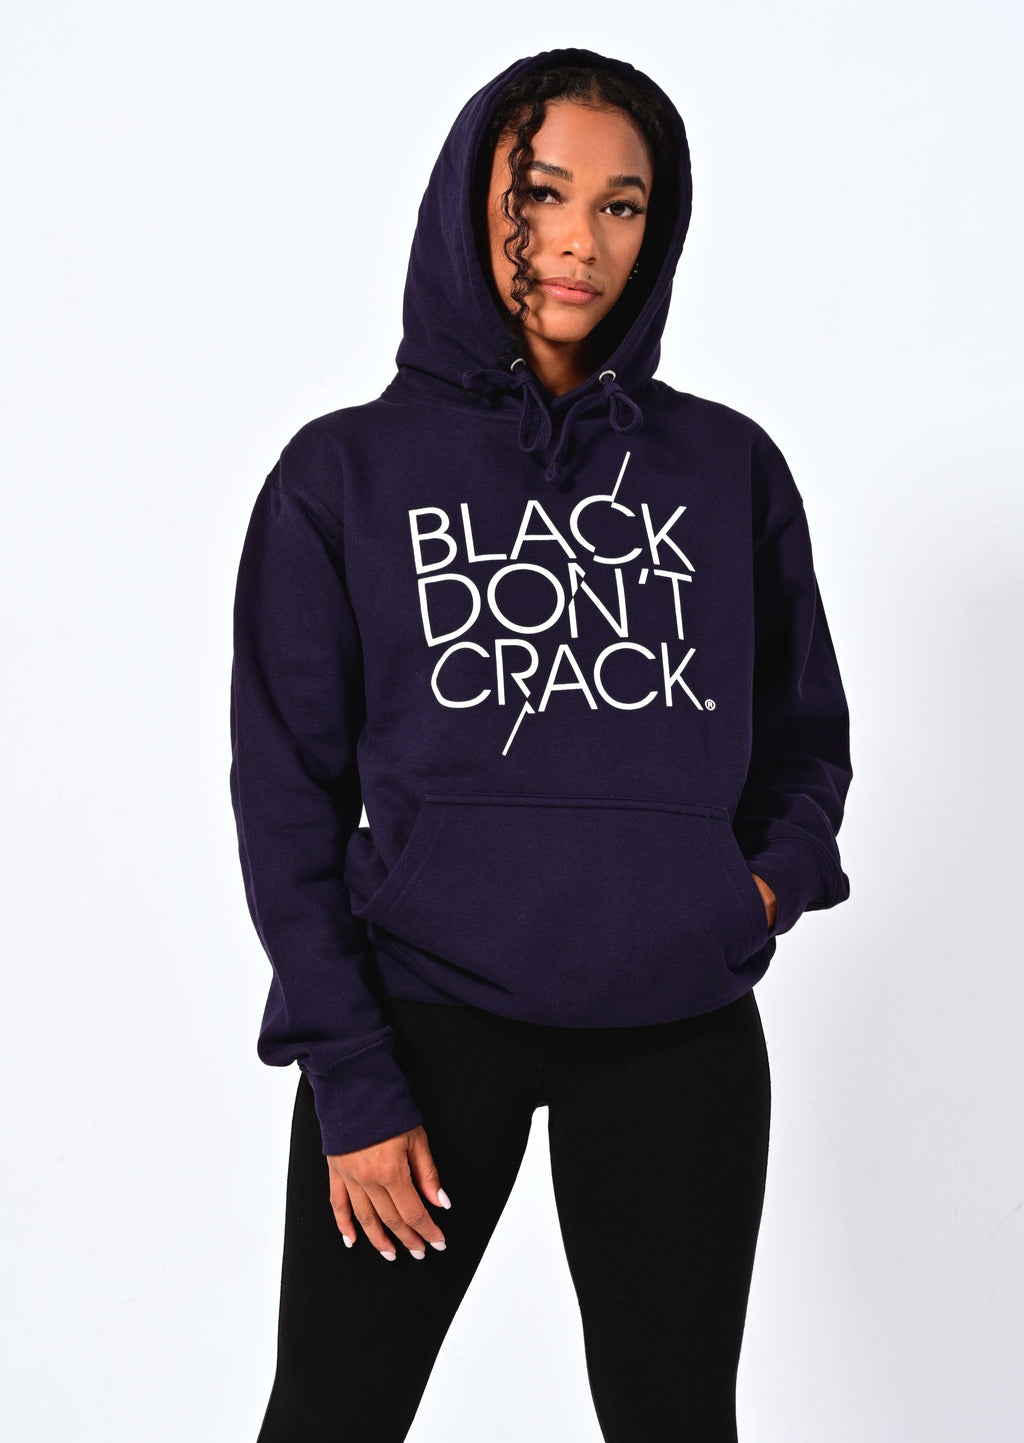 Our 9 oz logo Navy Black Don’t Crack hoodie is a classic fit sweatshirt. It has a roomy front kanga pocket, an adjustable drawstring hood to keep you warm and cozy. This signature overhead hoodie is made with soft but durable dual blend fabric. If you want comfort and style make this your favorite all day hoodie.  80% Cotton 20% Poly Wash In Cold Water Or Dry Clean Hang Dry For Best Results